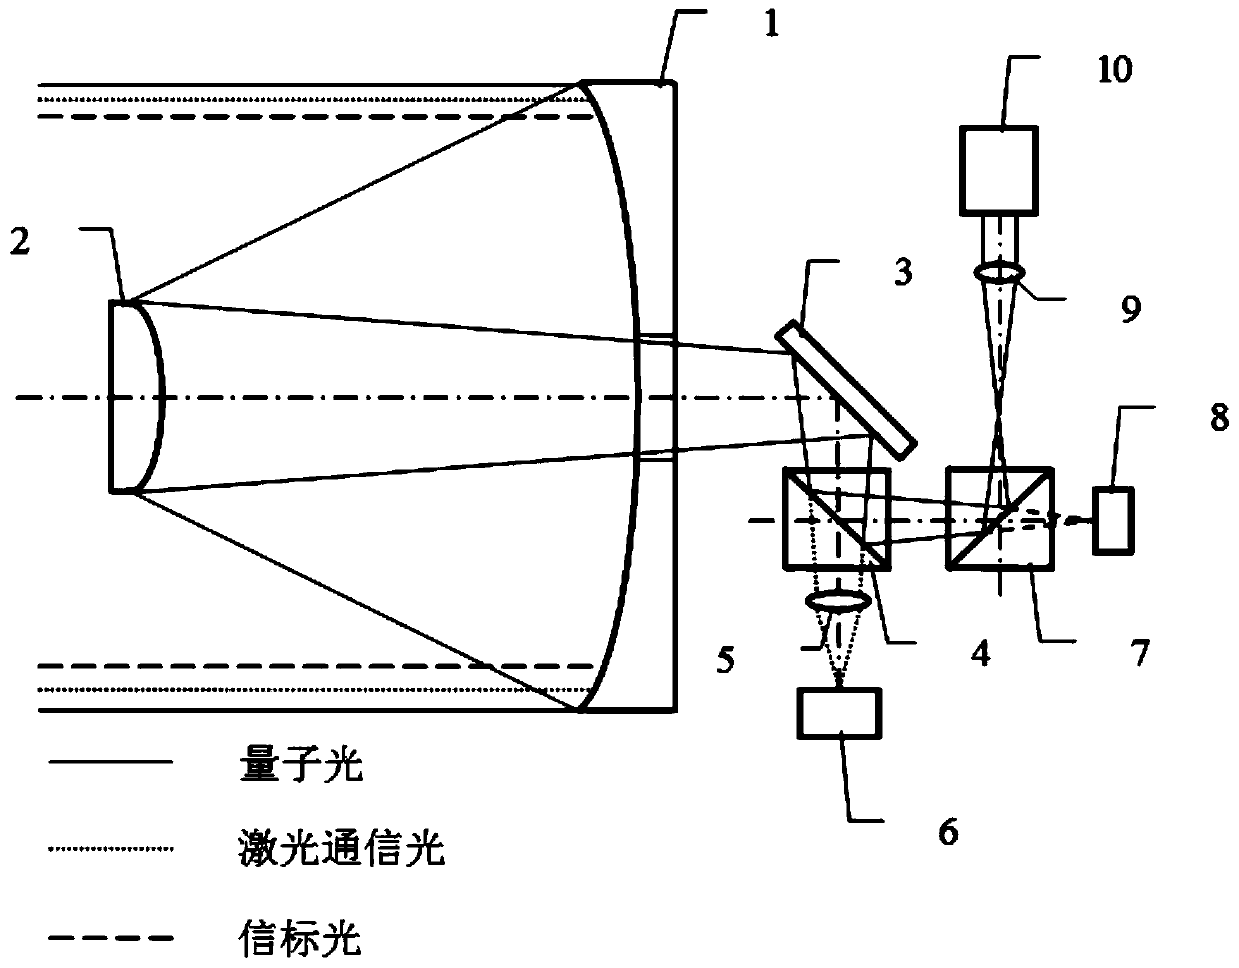 Light and small athermalization quantum communication ground station telescope optical system